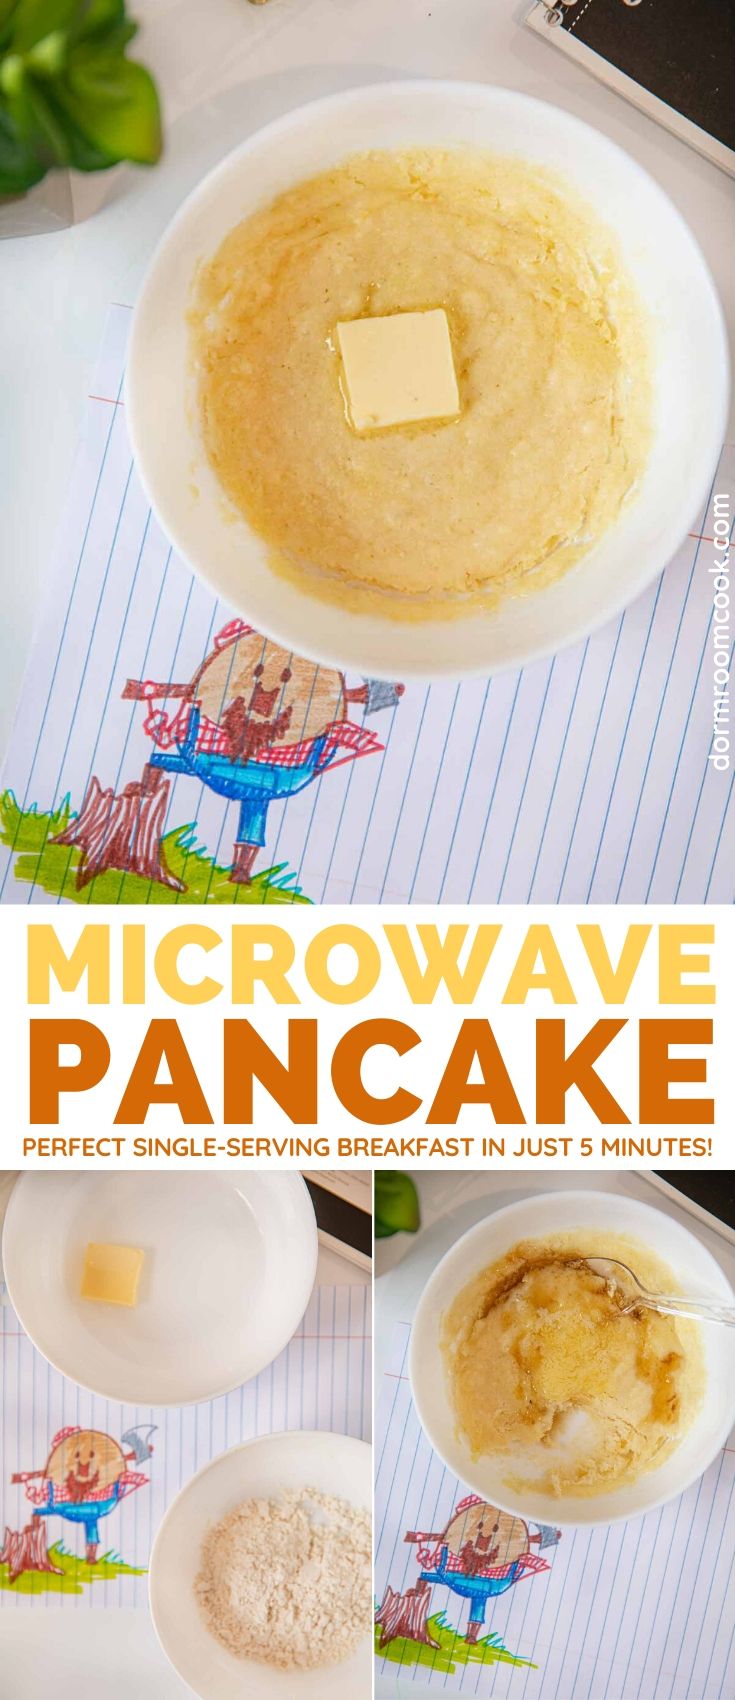 Microwave Pancake with butter